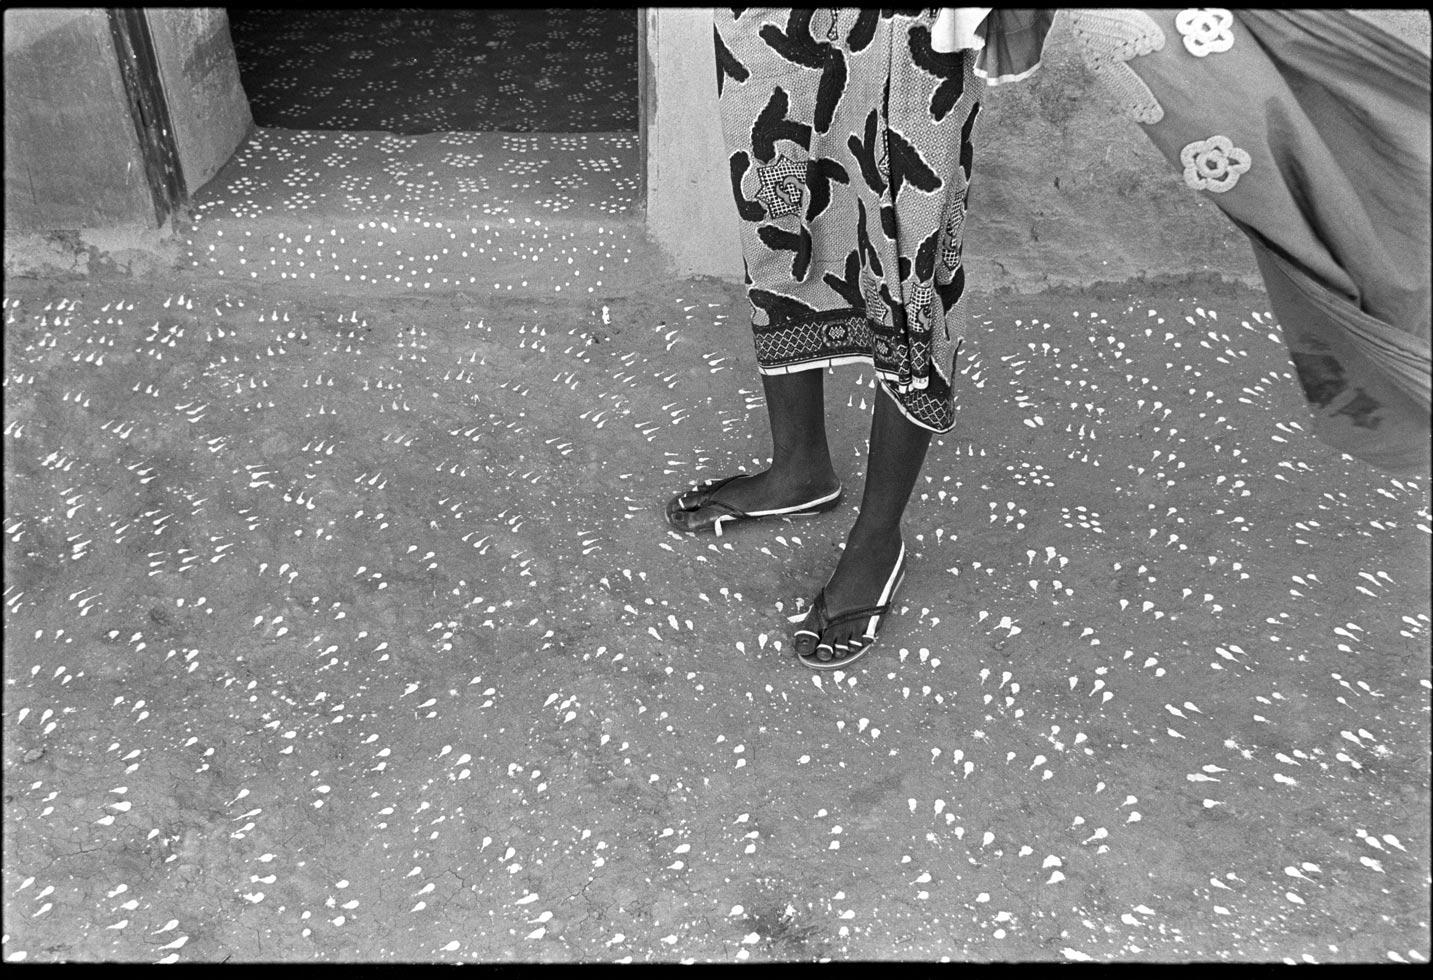 "The footprint of one person is narrow." Congolese proverb

Diafarabé, Mali, 1994

During the Peul Crossing of the Cattle Festival, the houses are cleaned, painted and decorated. This courtyard was decorated with a cat's-paw pattern created by three fingers dipped in whitewash.